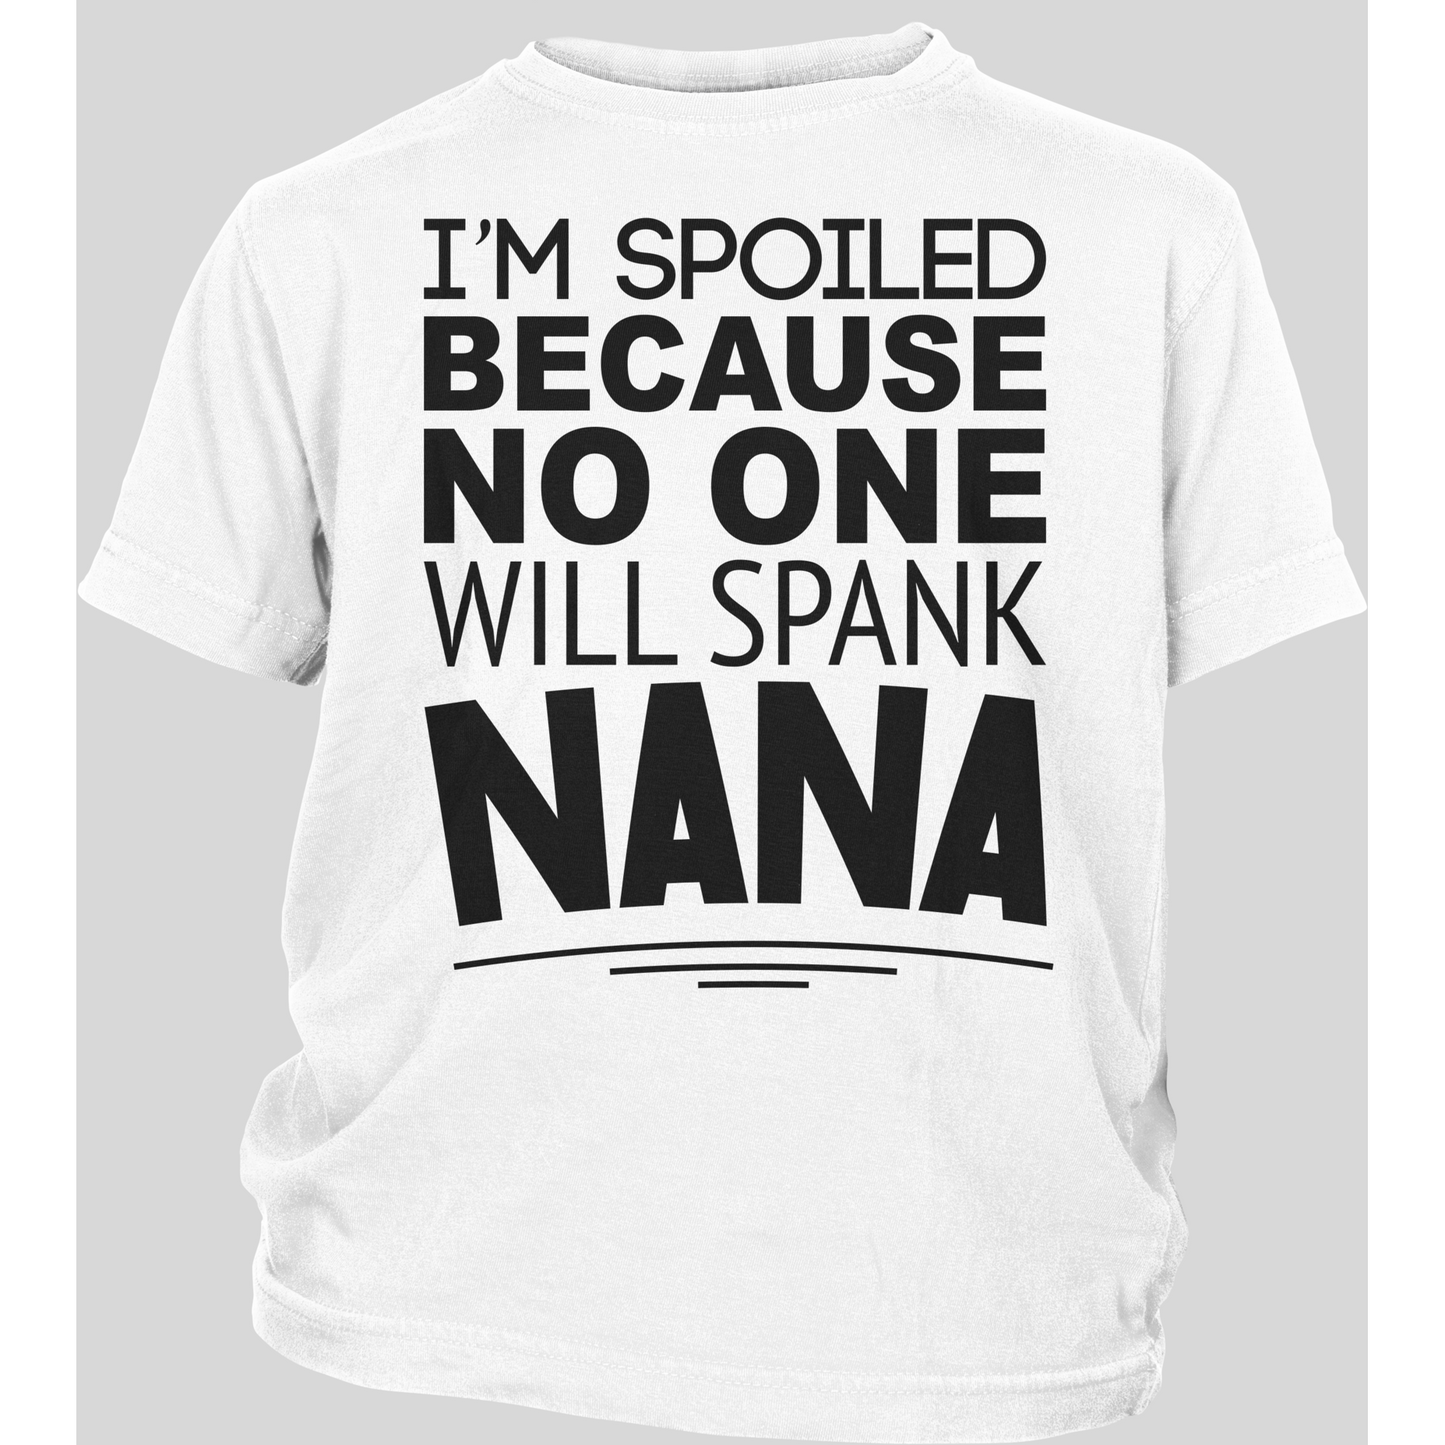 I'm Spoiled Because No One Will Spank Nana ~ Toddler